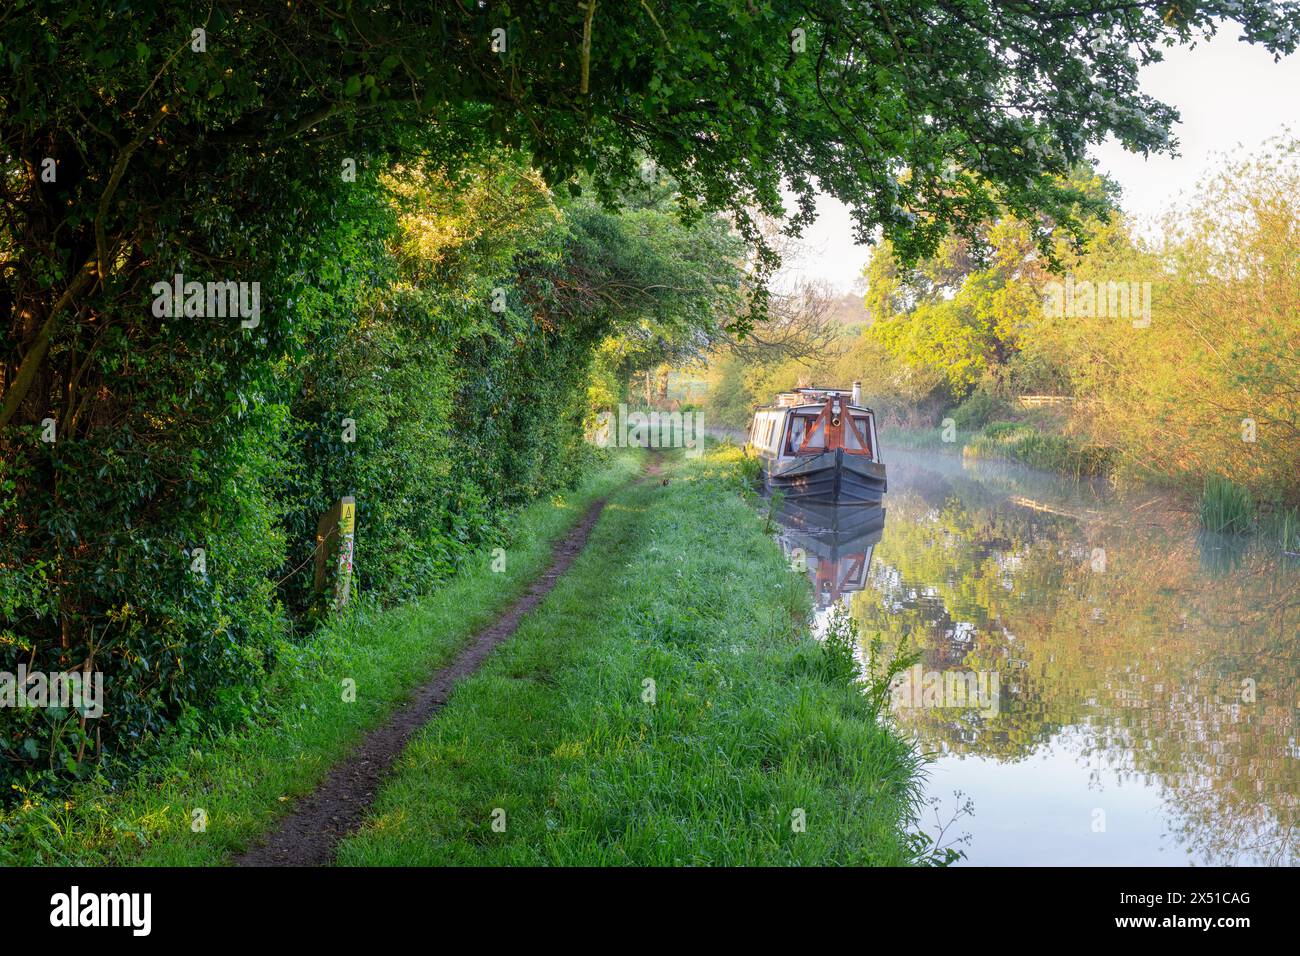 Narrowboat on the Oxford canal in spring at sunrise near Twyford wharf. Kings Sutton, Oxfordshire / Northamptonshire border, England Stock Photo